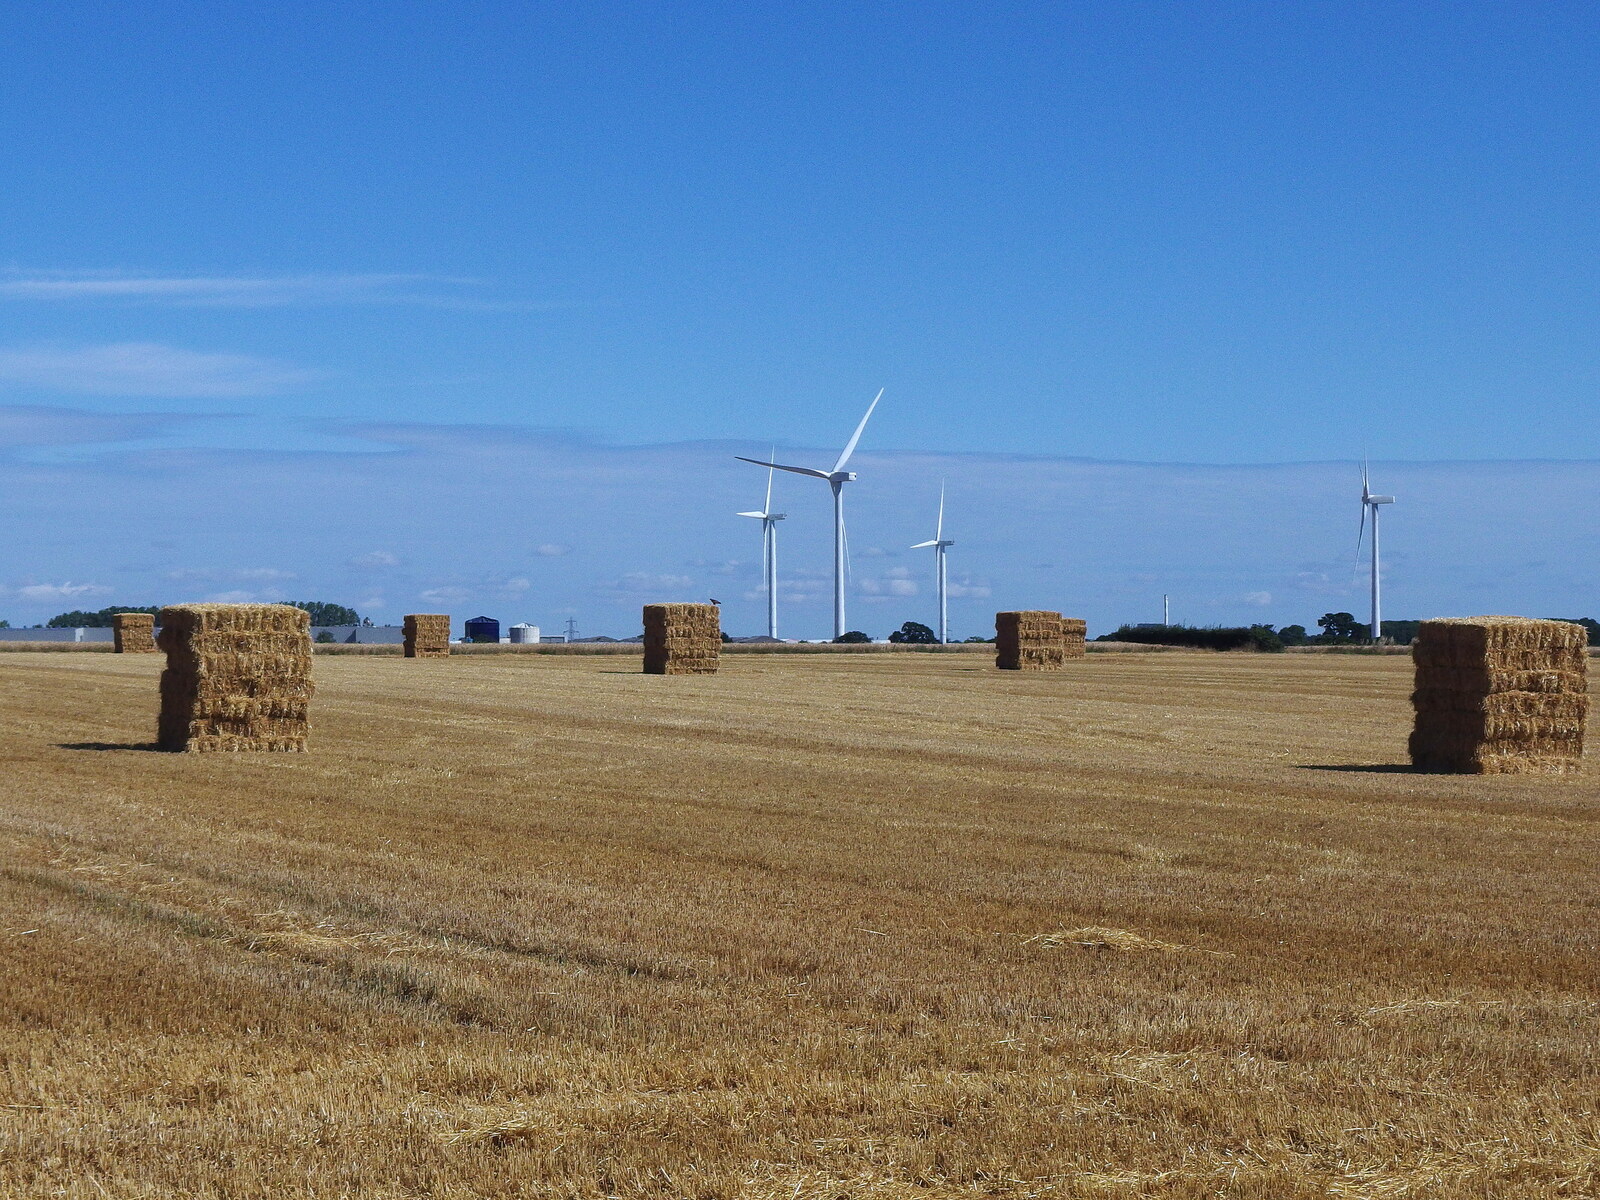 Stacked bales and the wind turbines from A Ride to Walsham Le Willows, Suffolk - 15th July 2022